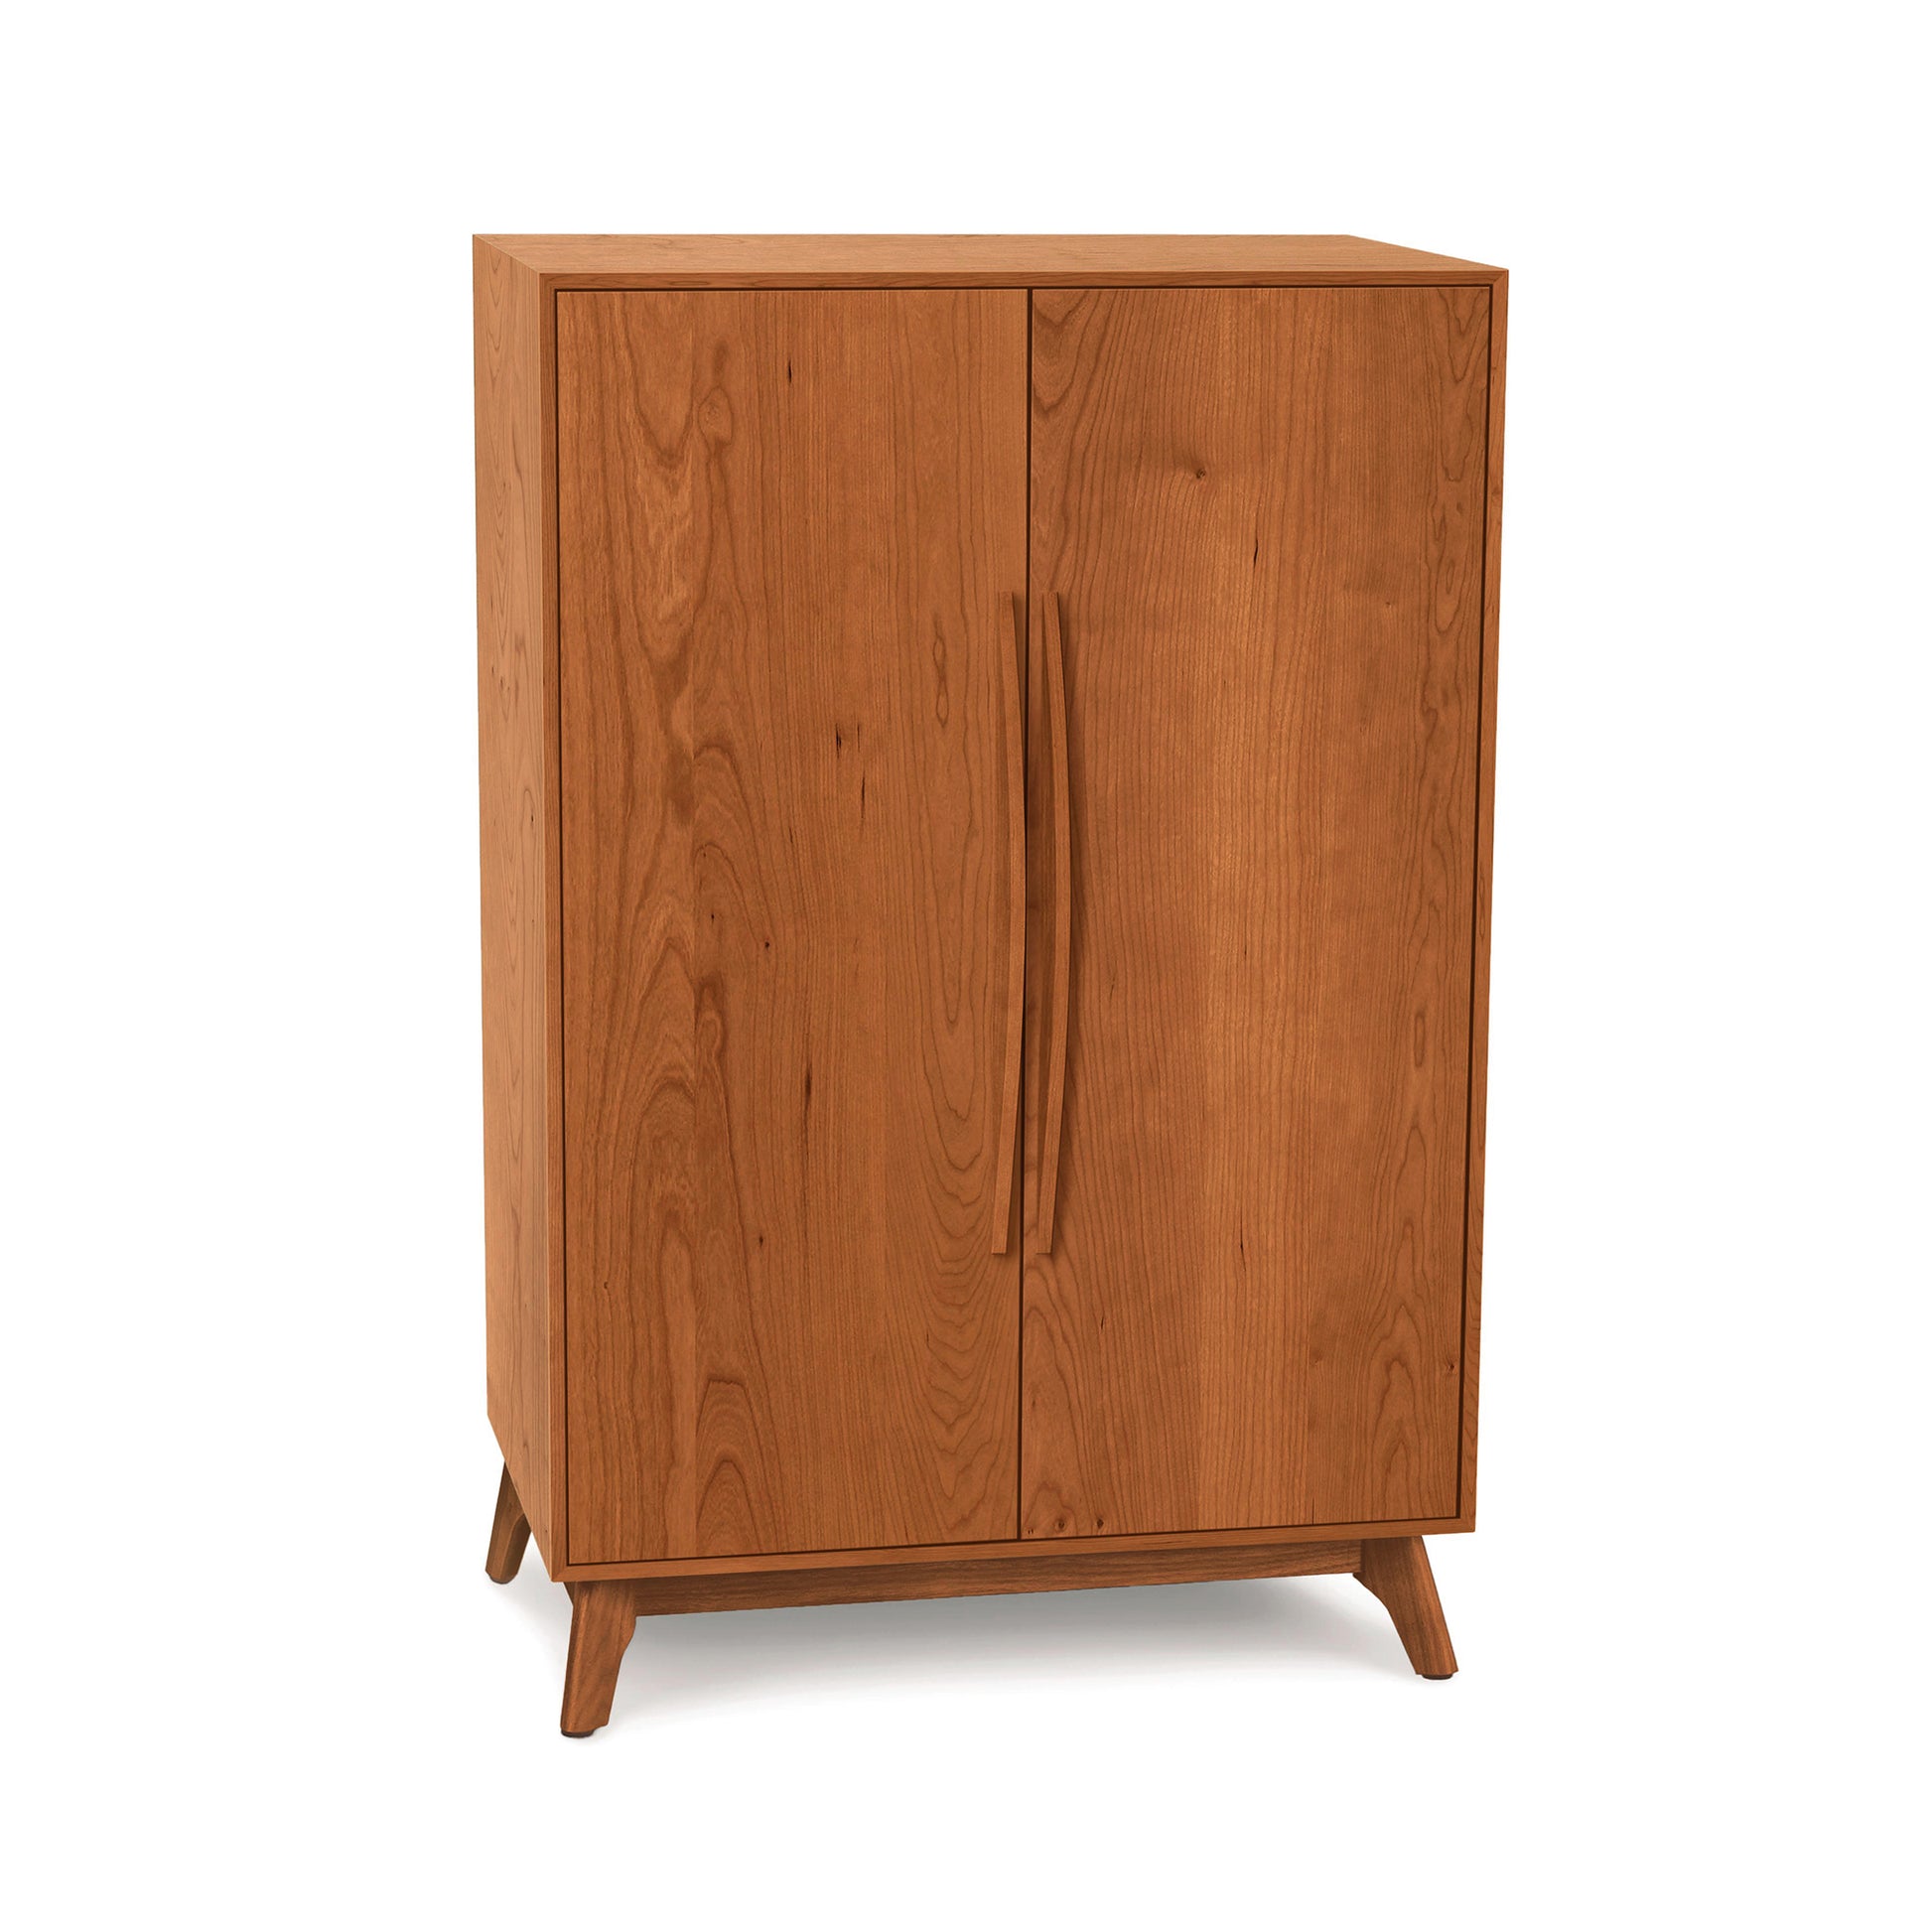 A Copeland Furniture Catalina Bar Cabinet with a simple design and two doors, standing against a white background, offers elegant wine storage.